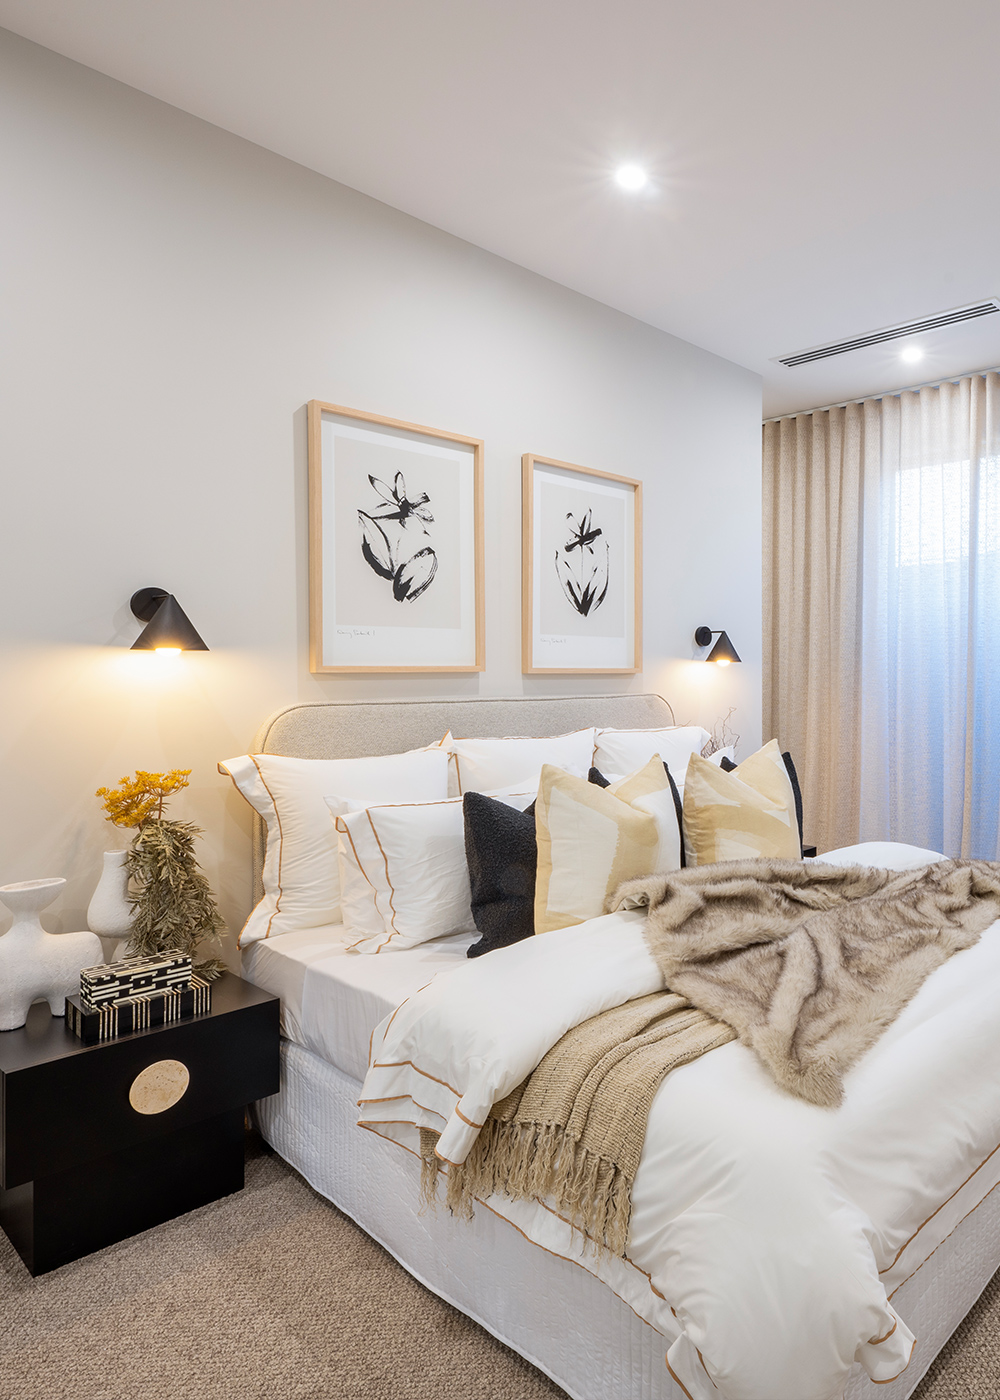 Master bedroom with large central bed with layers of throw rugs and decorative cushions in shades of cream.